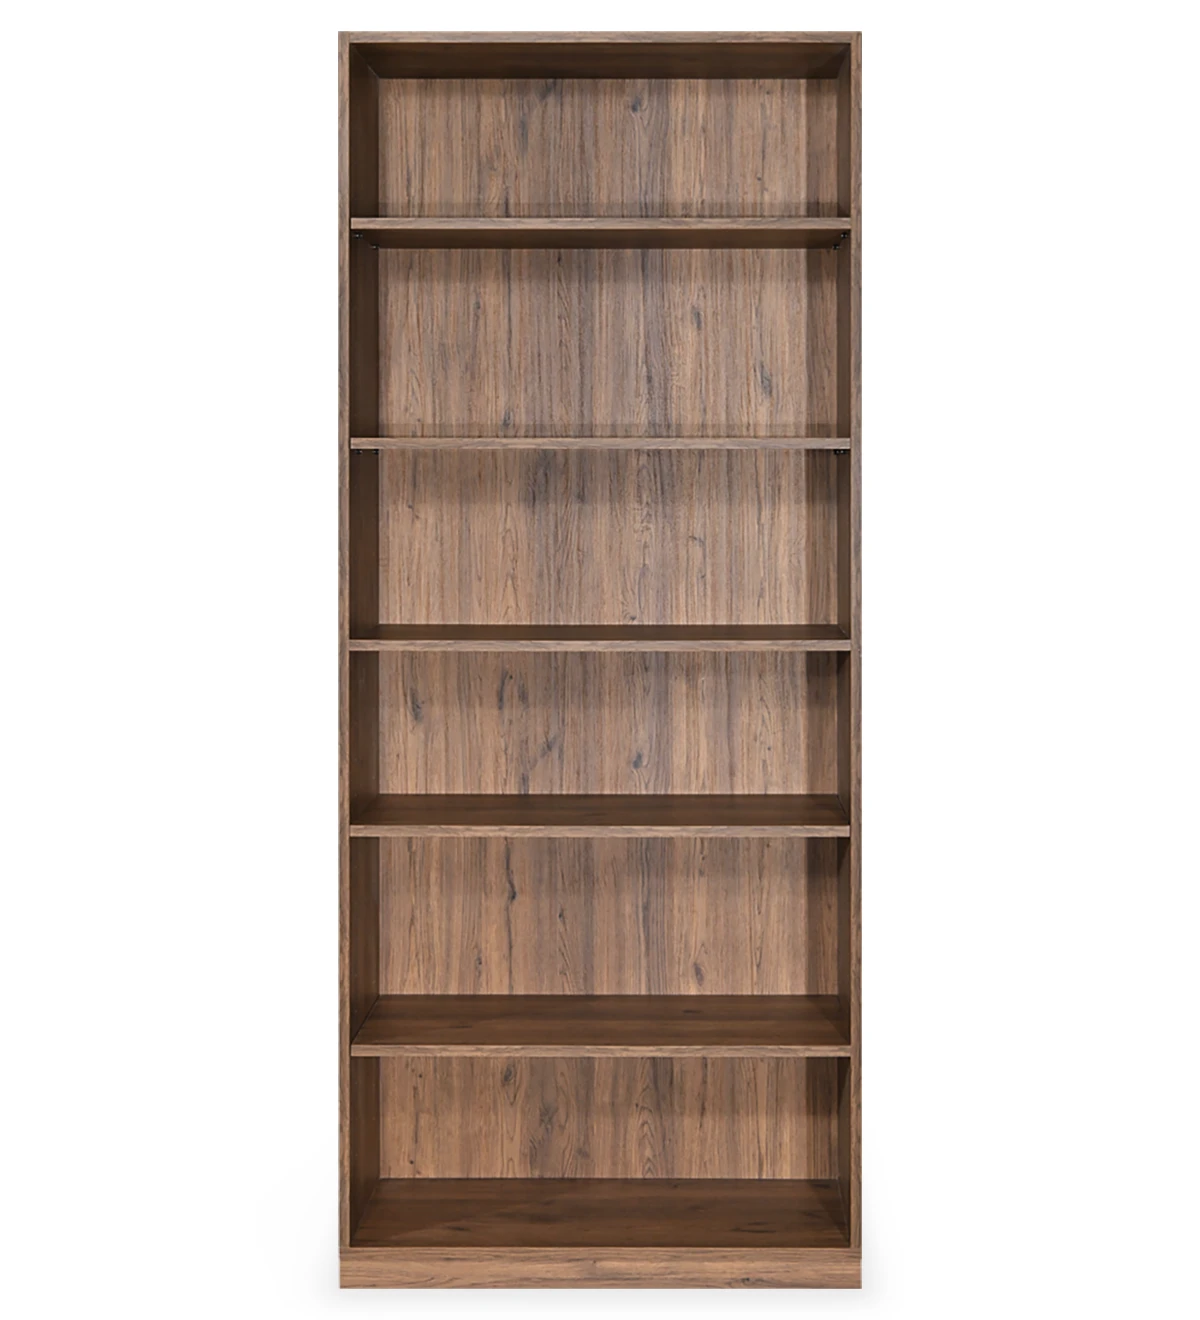 Tall bookcase cabinet in aged oak, with removable shelves.